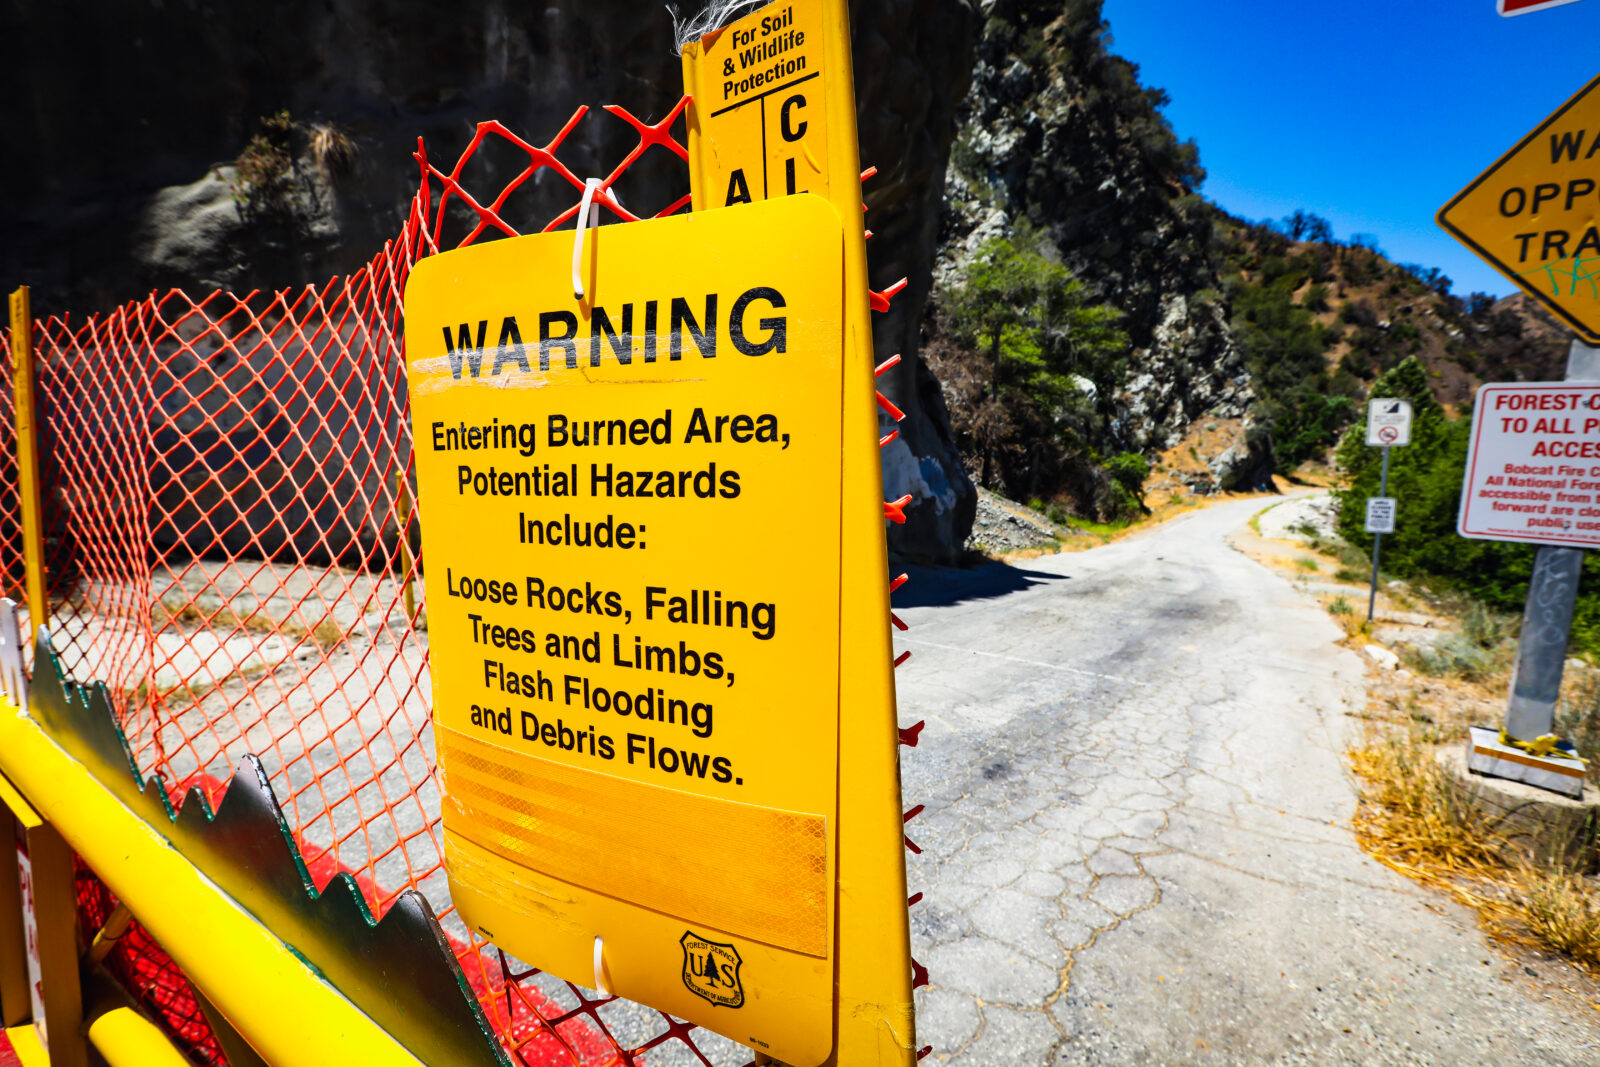 Close-up view of a potential hazards warning sign